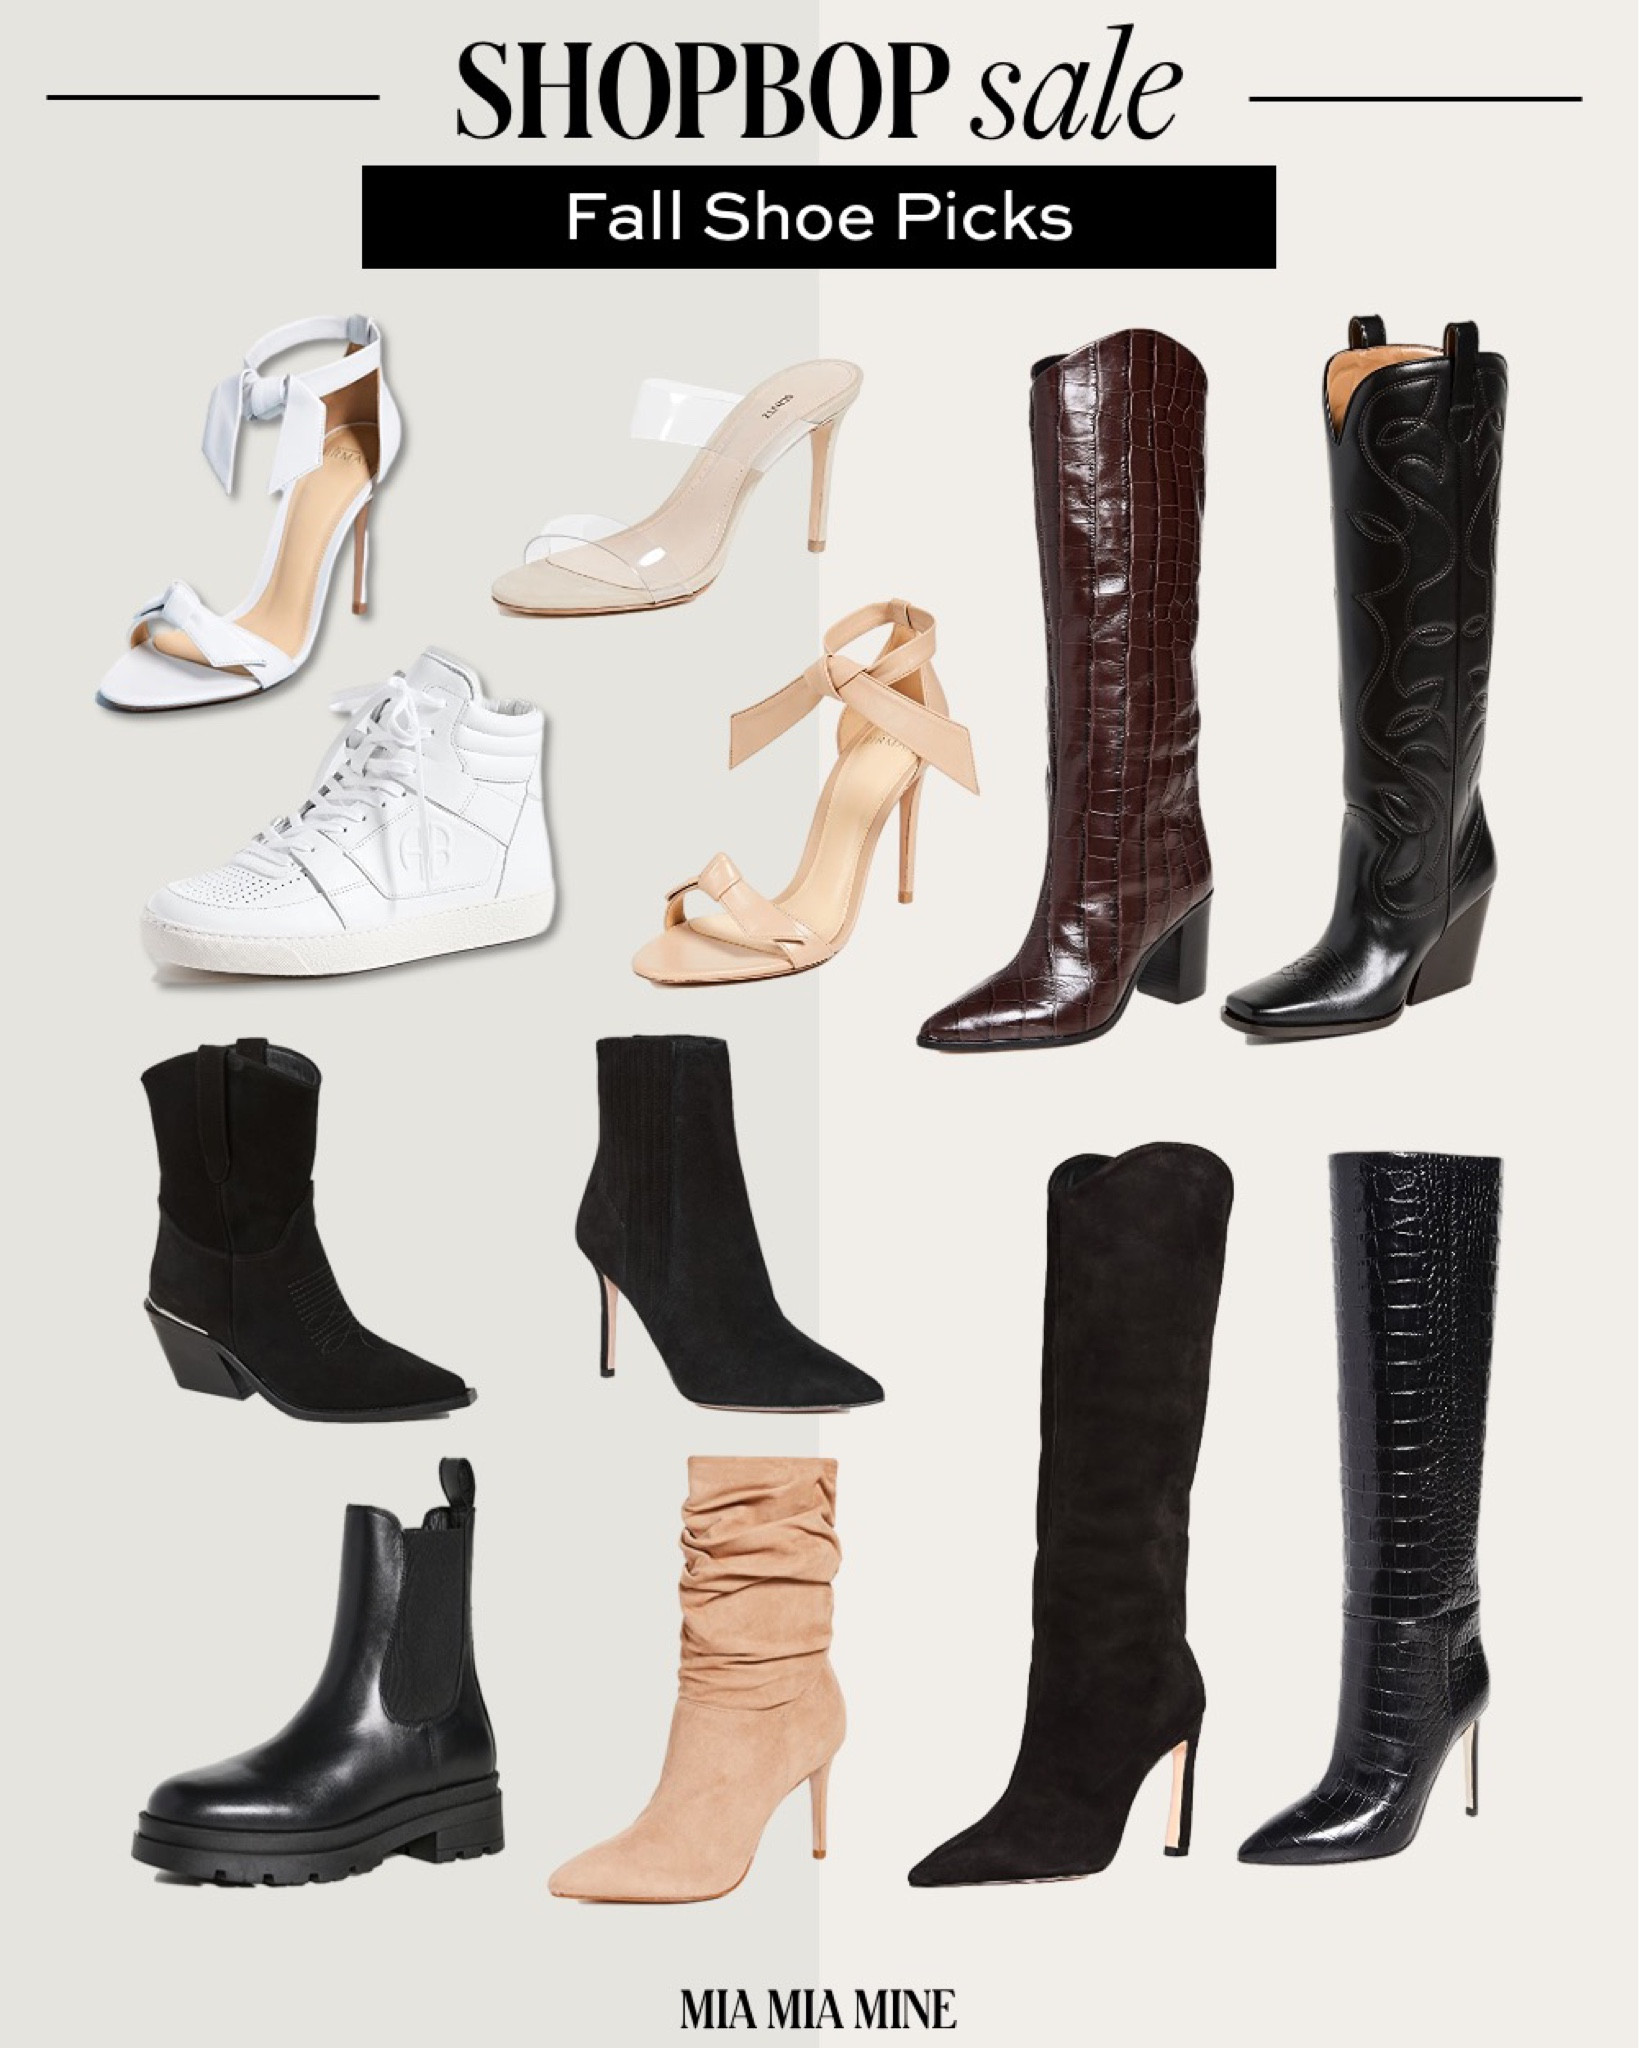 ANINE BING Tall Tania Boots curated on LTK